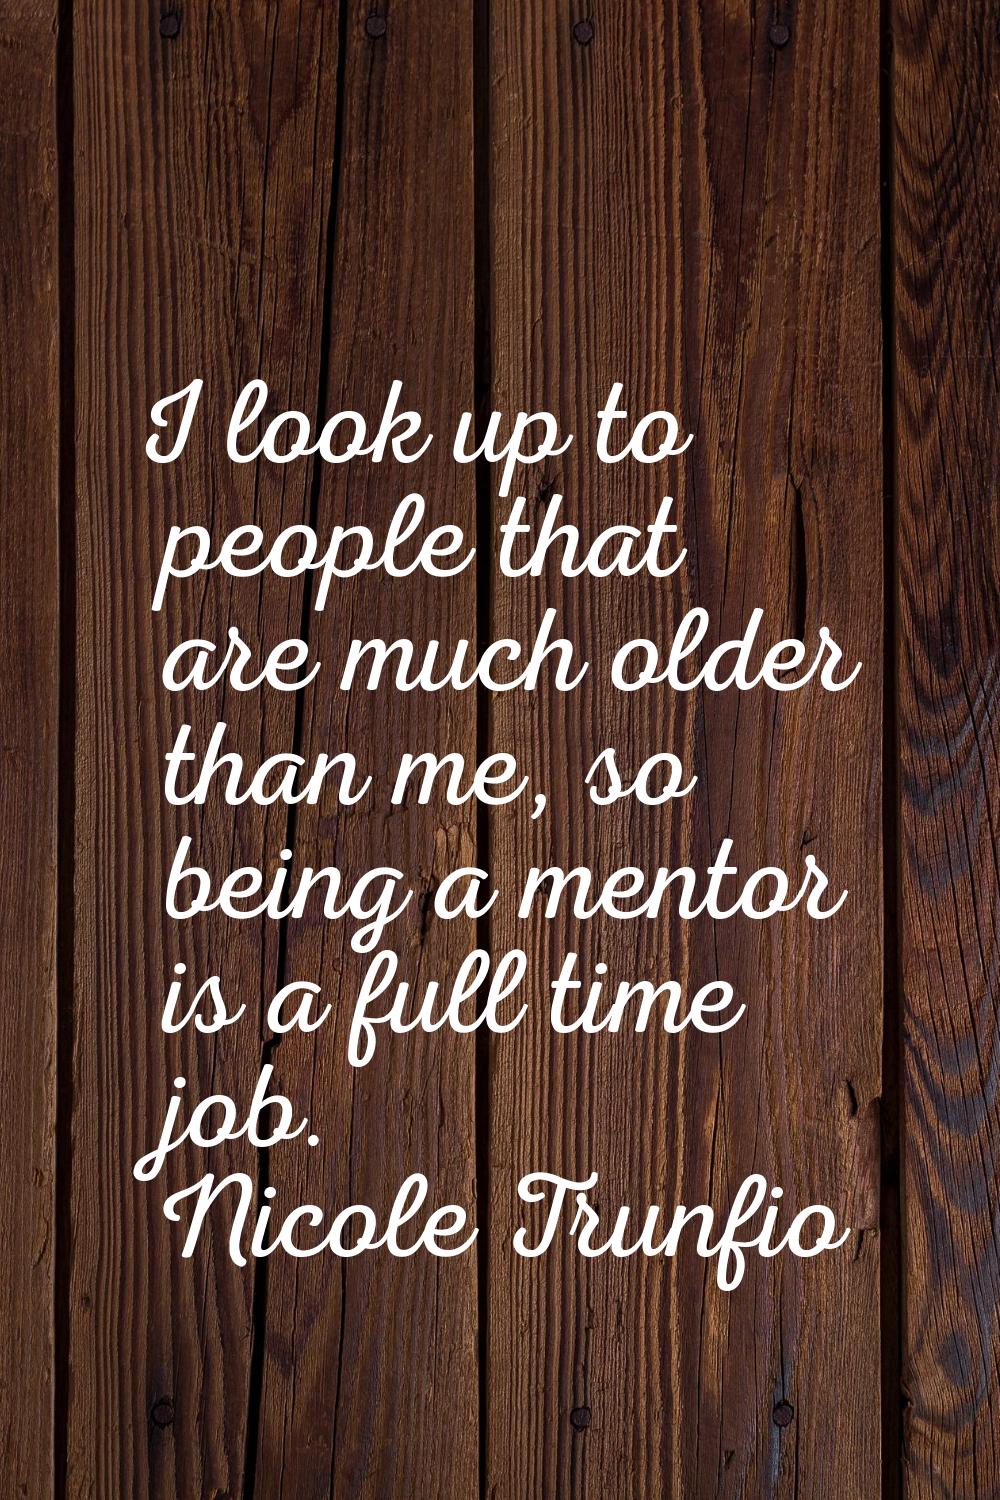 I look up to people that are much older than me, so being a mentor is a full time job.